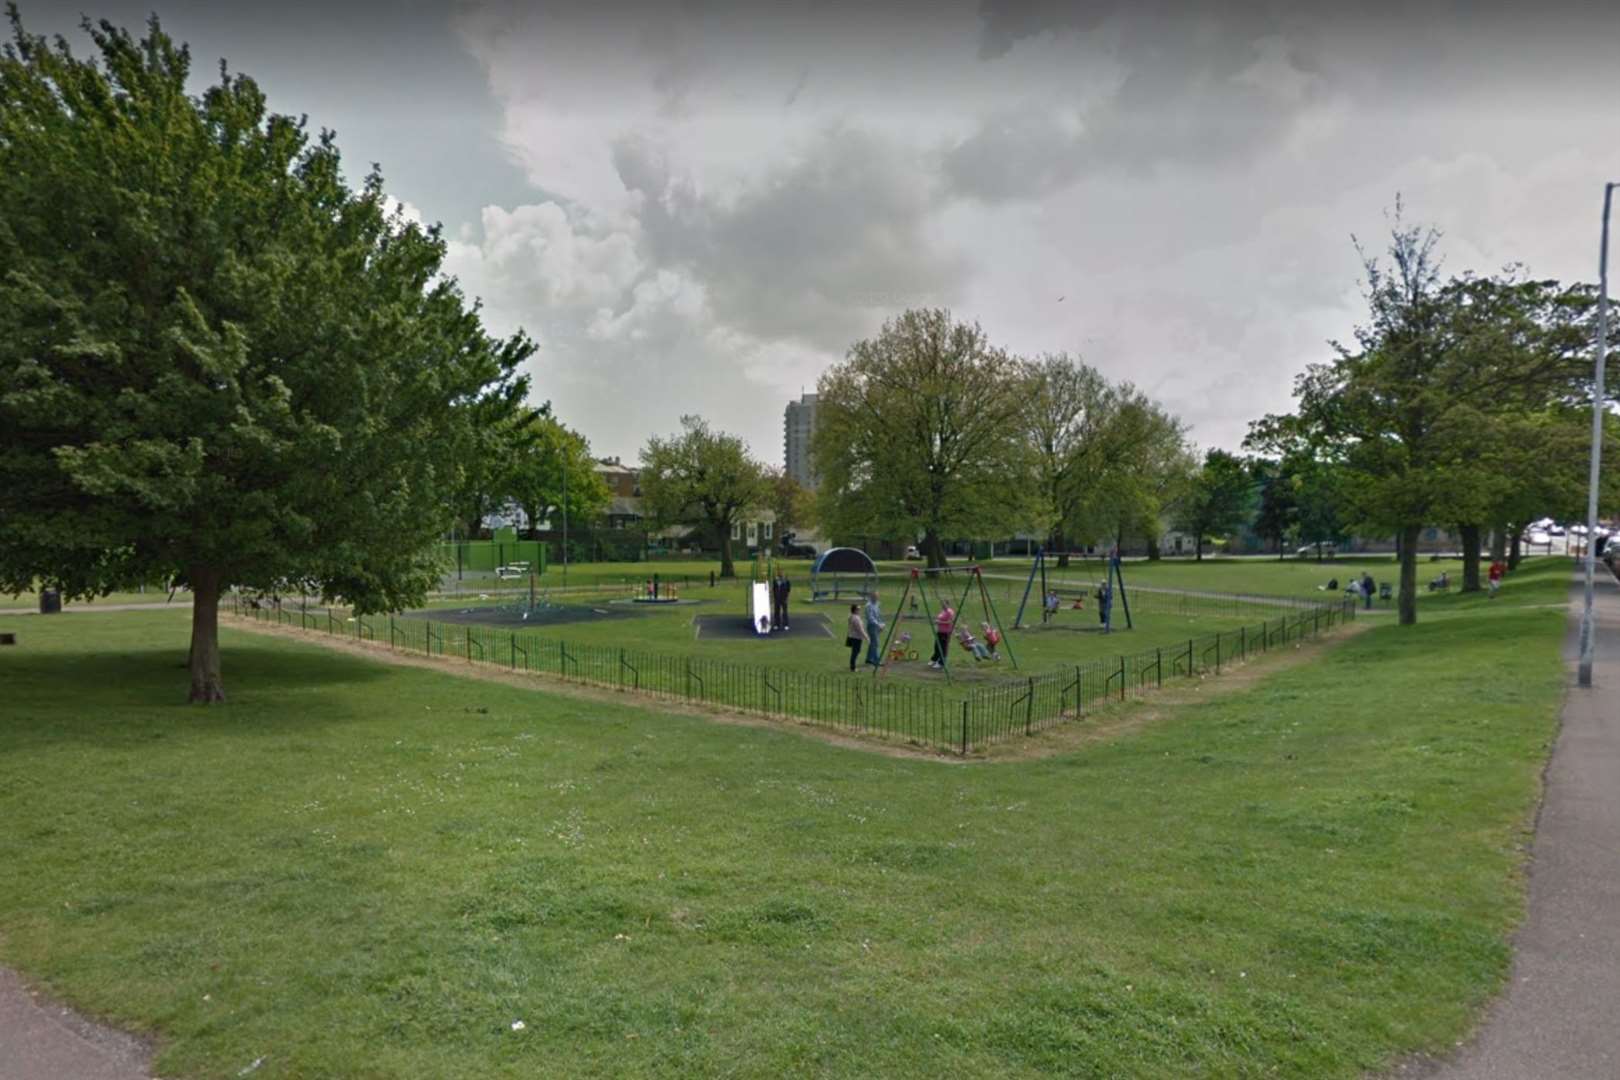 A meat clever was found among the trees and slightly buried in Boundary Park in Ramsgate. Picture: Google Maps